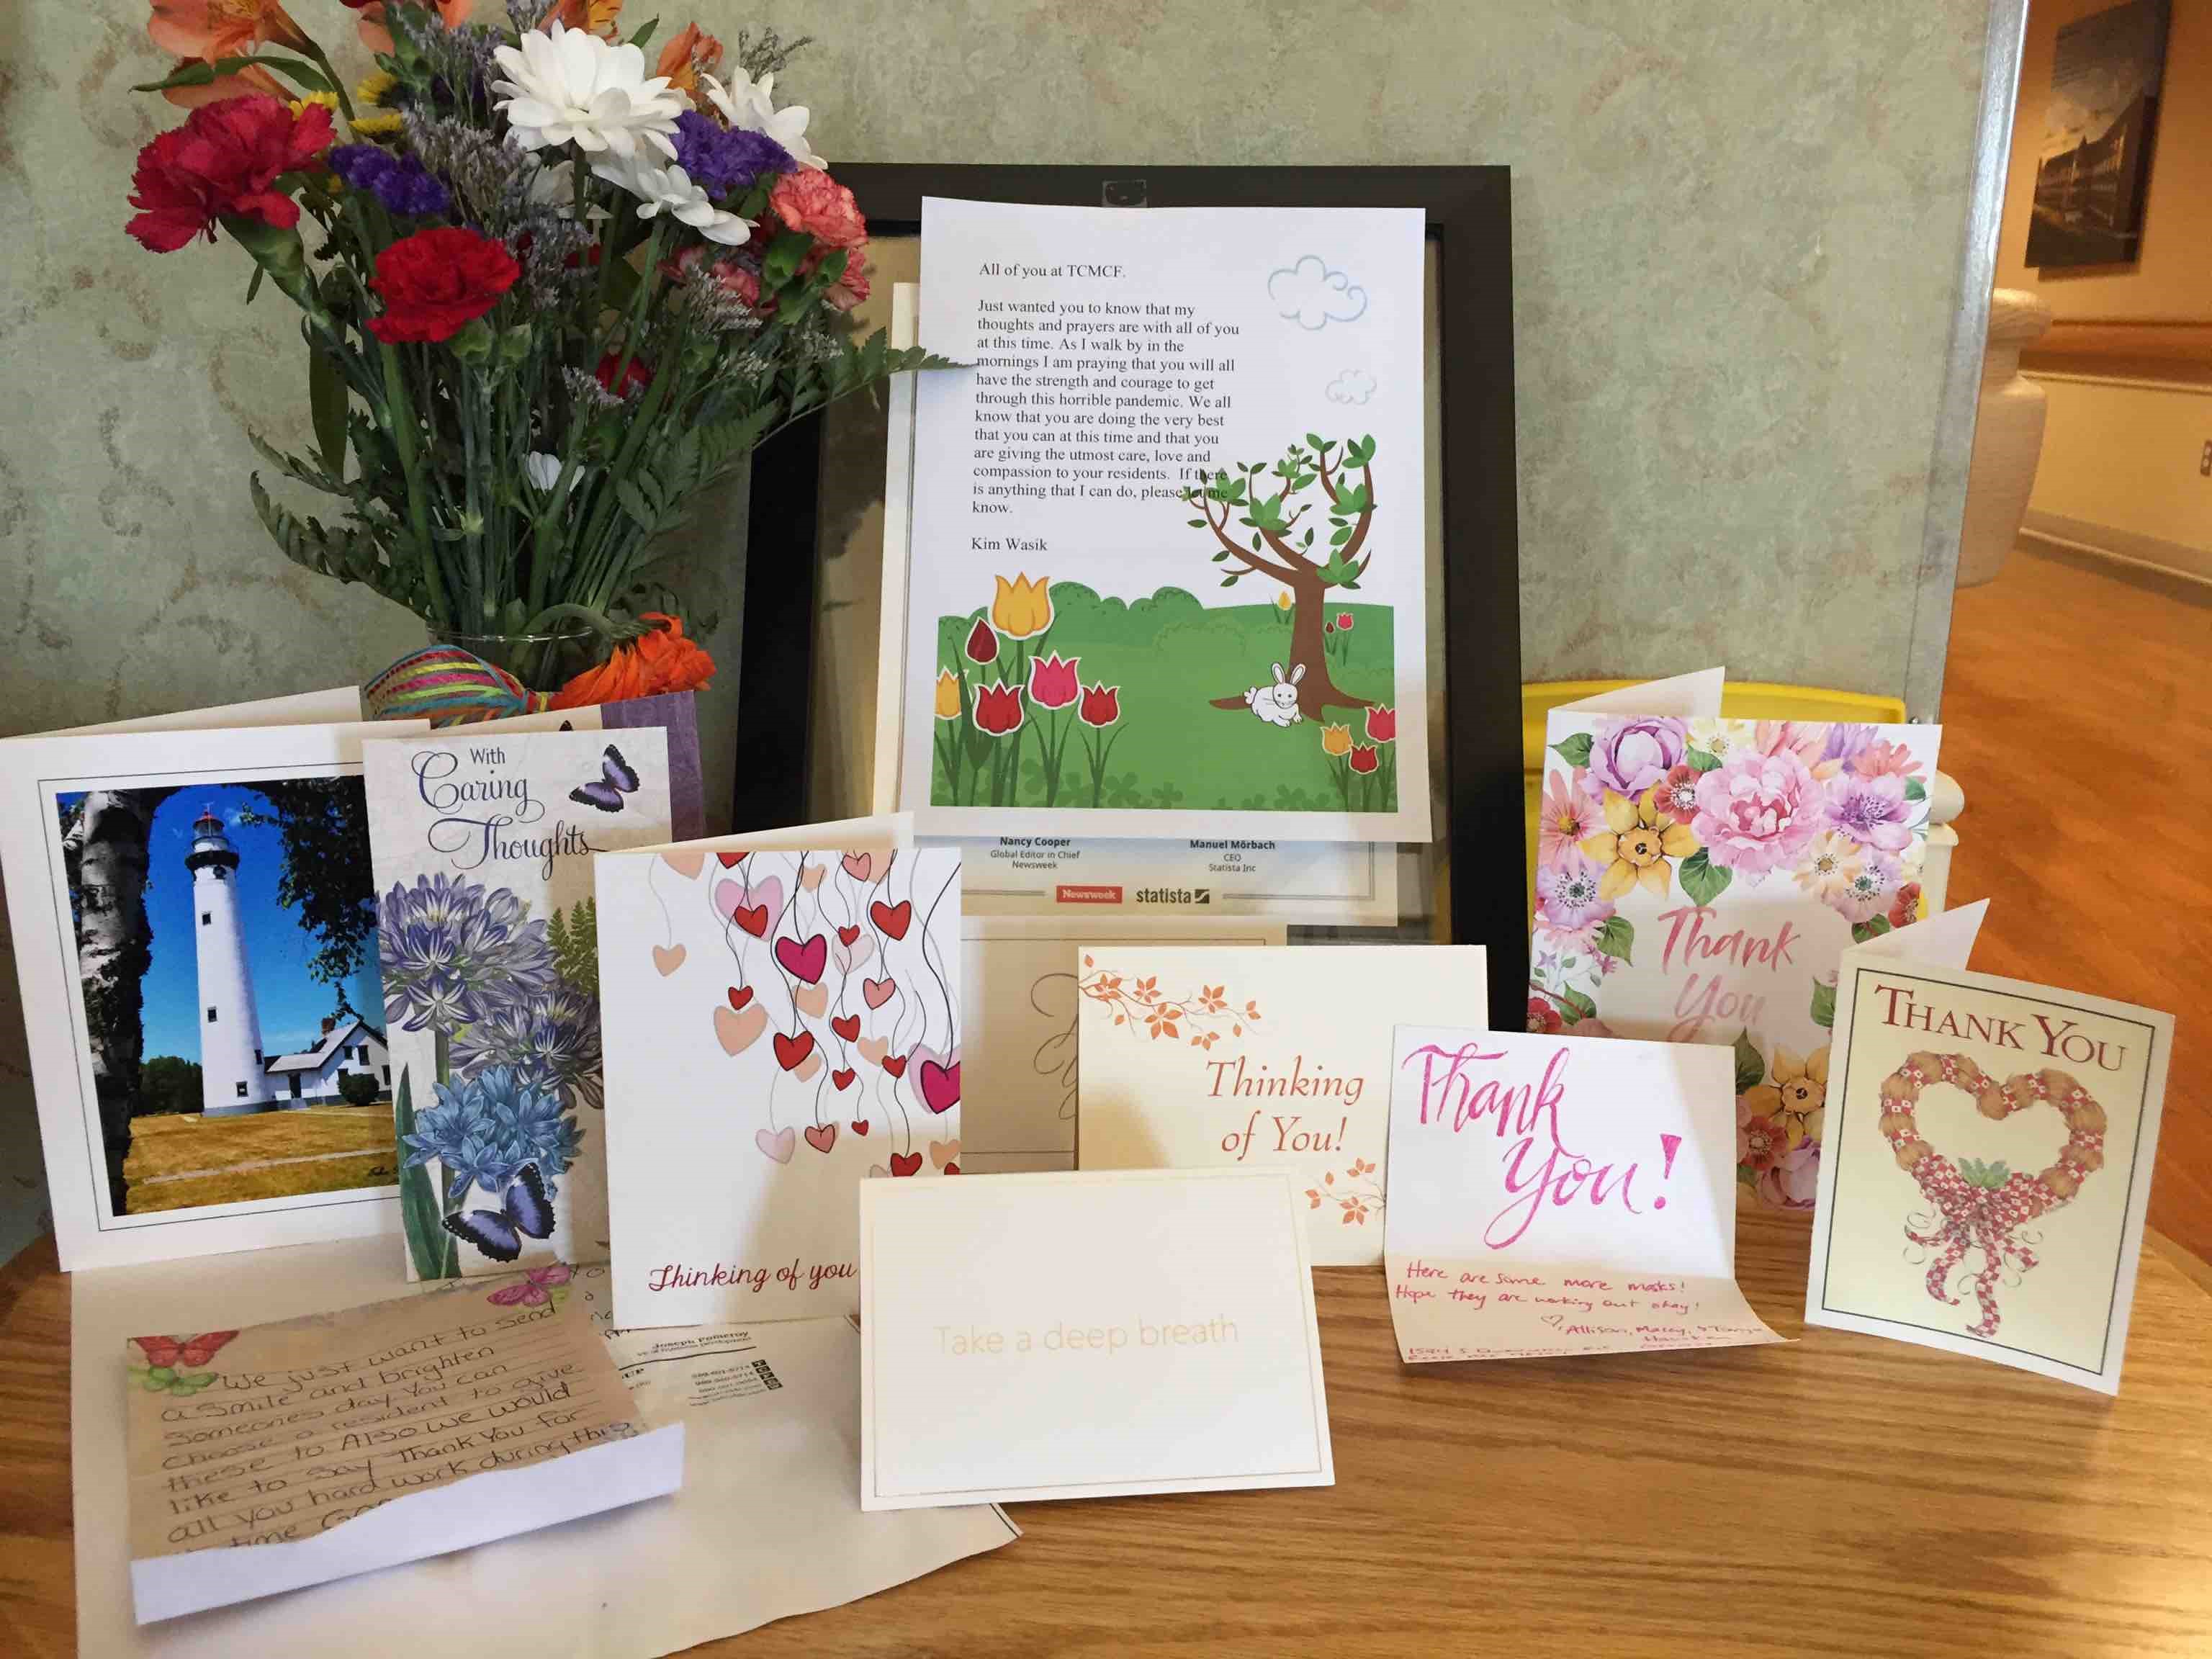 Cards from family displayed on a table.